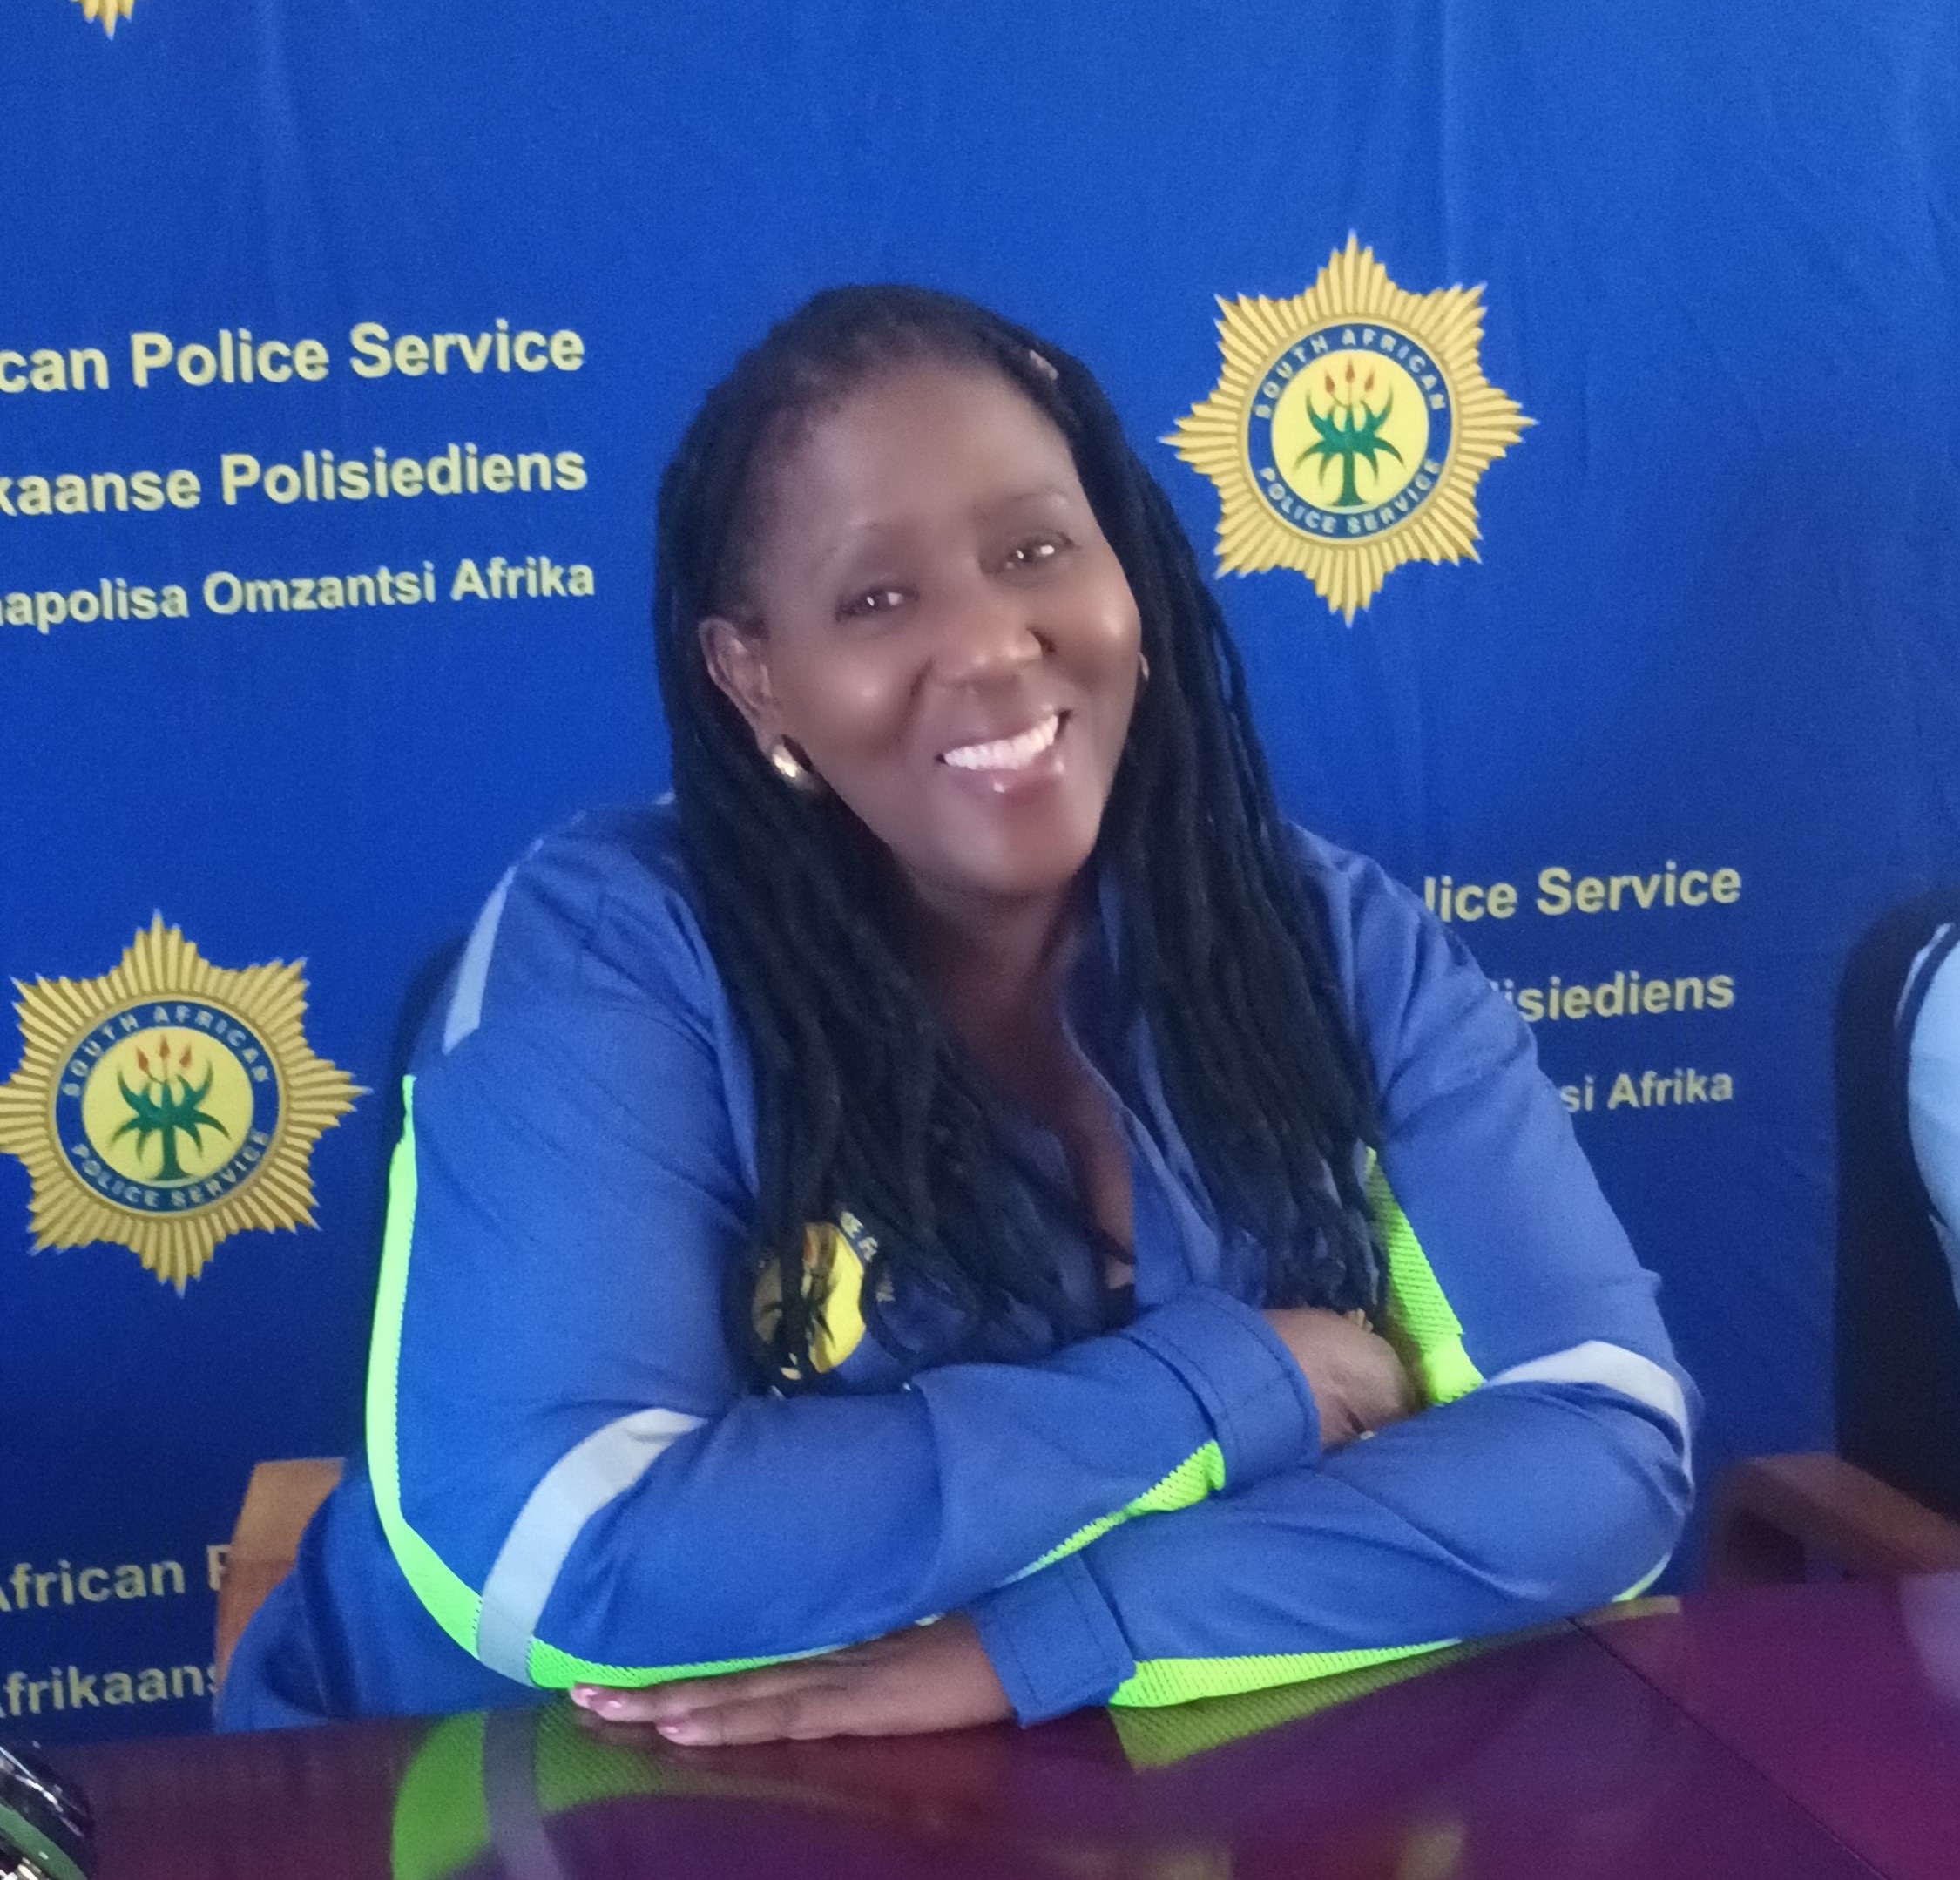 'He must rot in jail' - Western Cape CPF about Gugulethu CPF deputy chair's alleged killer